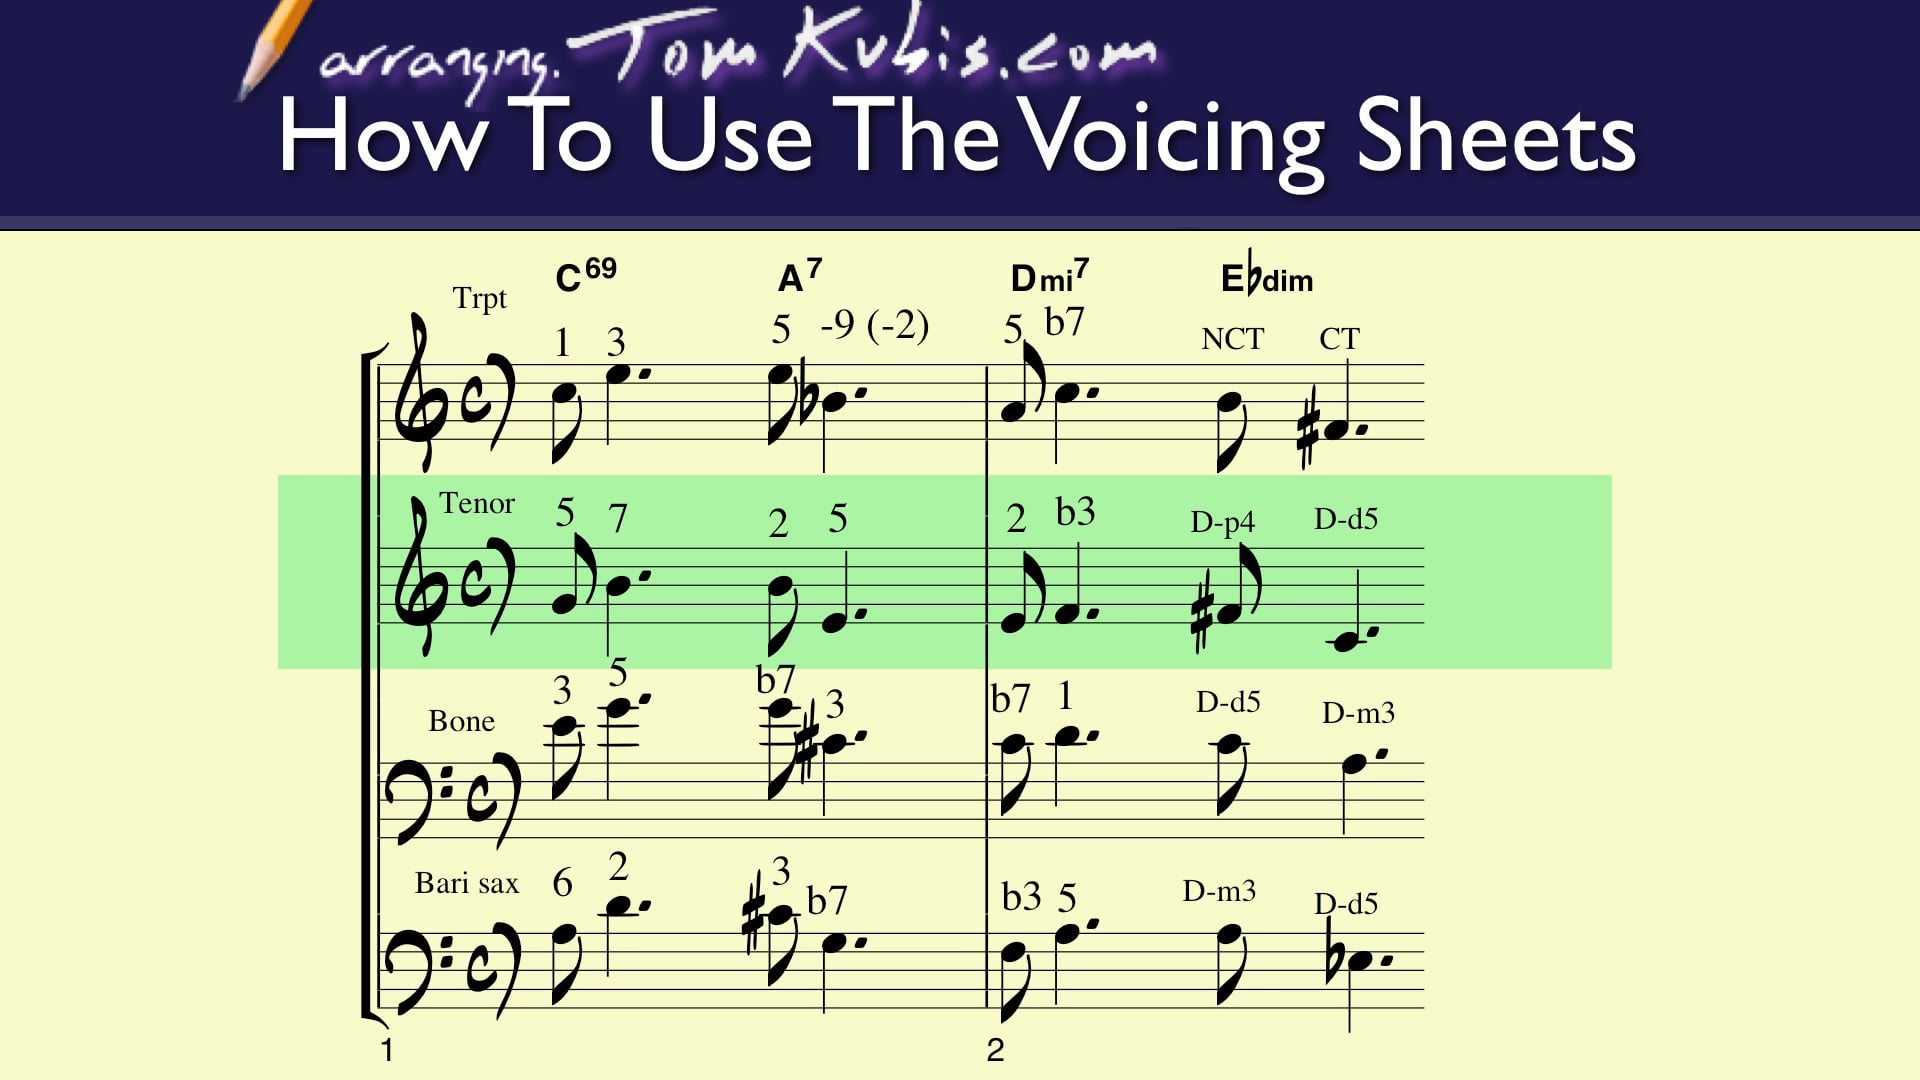 Watch 4 Voice Sheet-FREE-How Voice Maj 7 and 69 Chords Online Vimeo On Demand on Vimeo